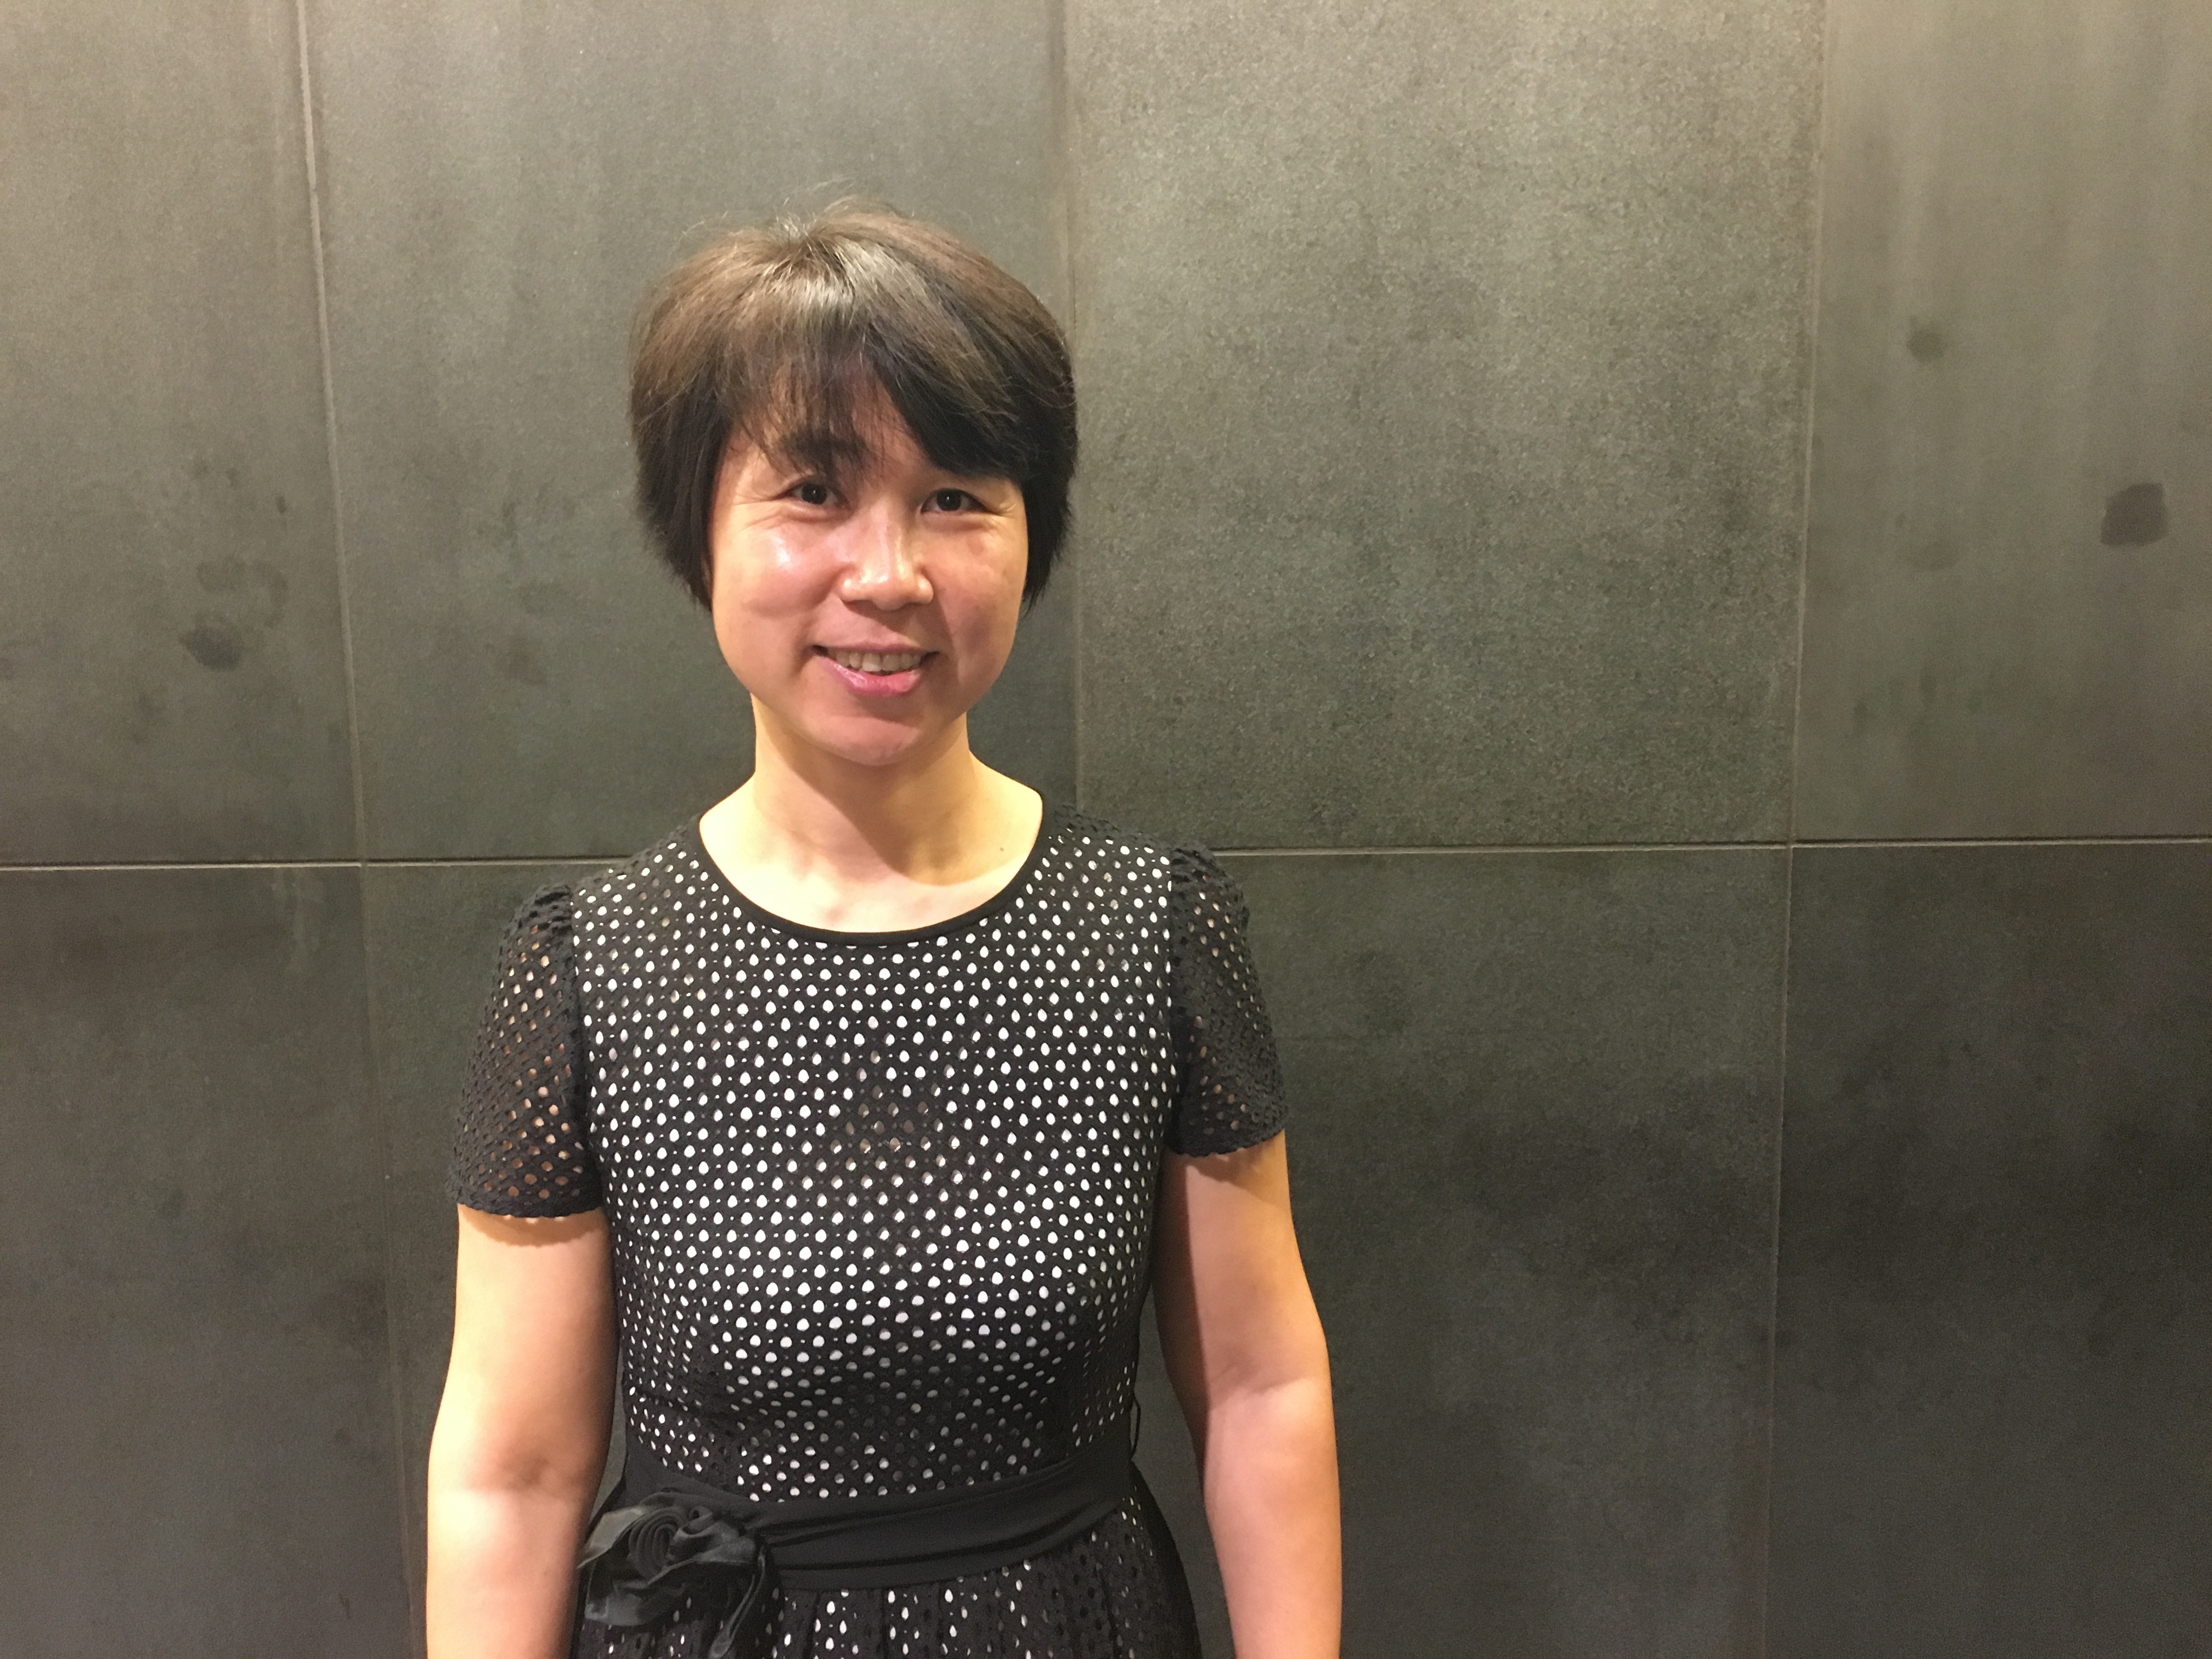 Dr Chun Lai, Associate Professor at the University of Hong Kong, shares how parents can use ICT to encourage the learning of Mother Tongue Languages.